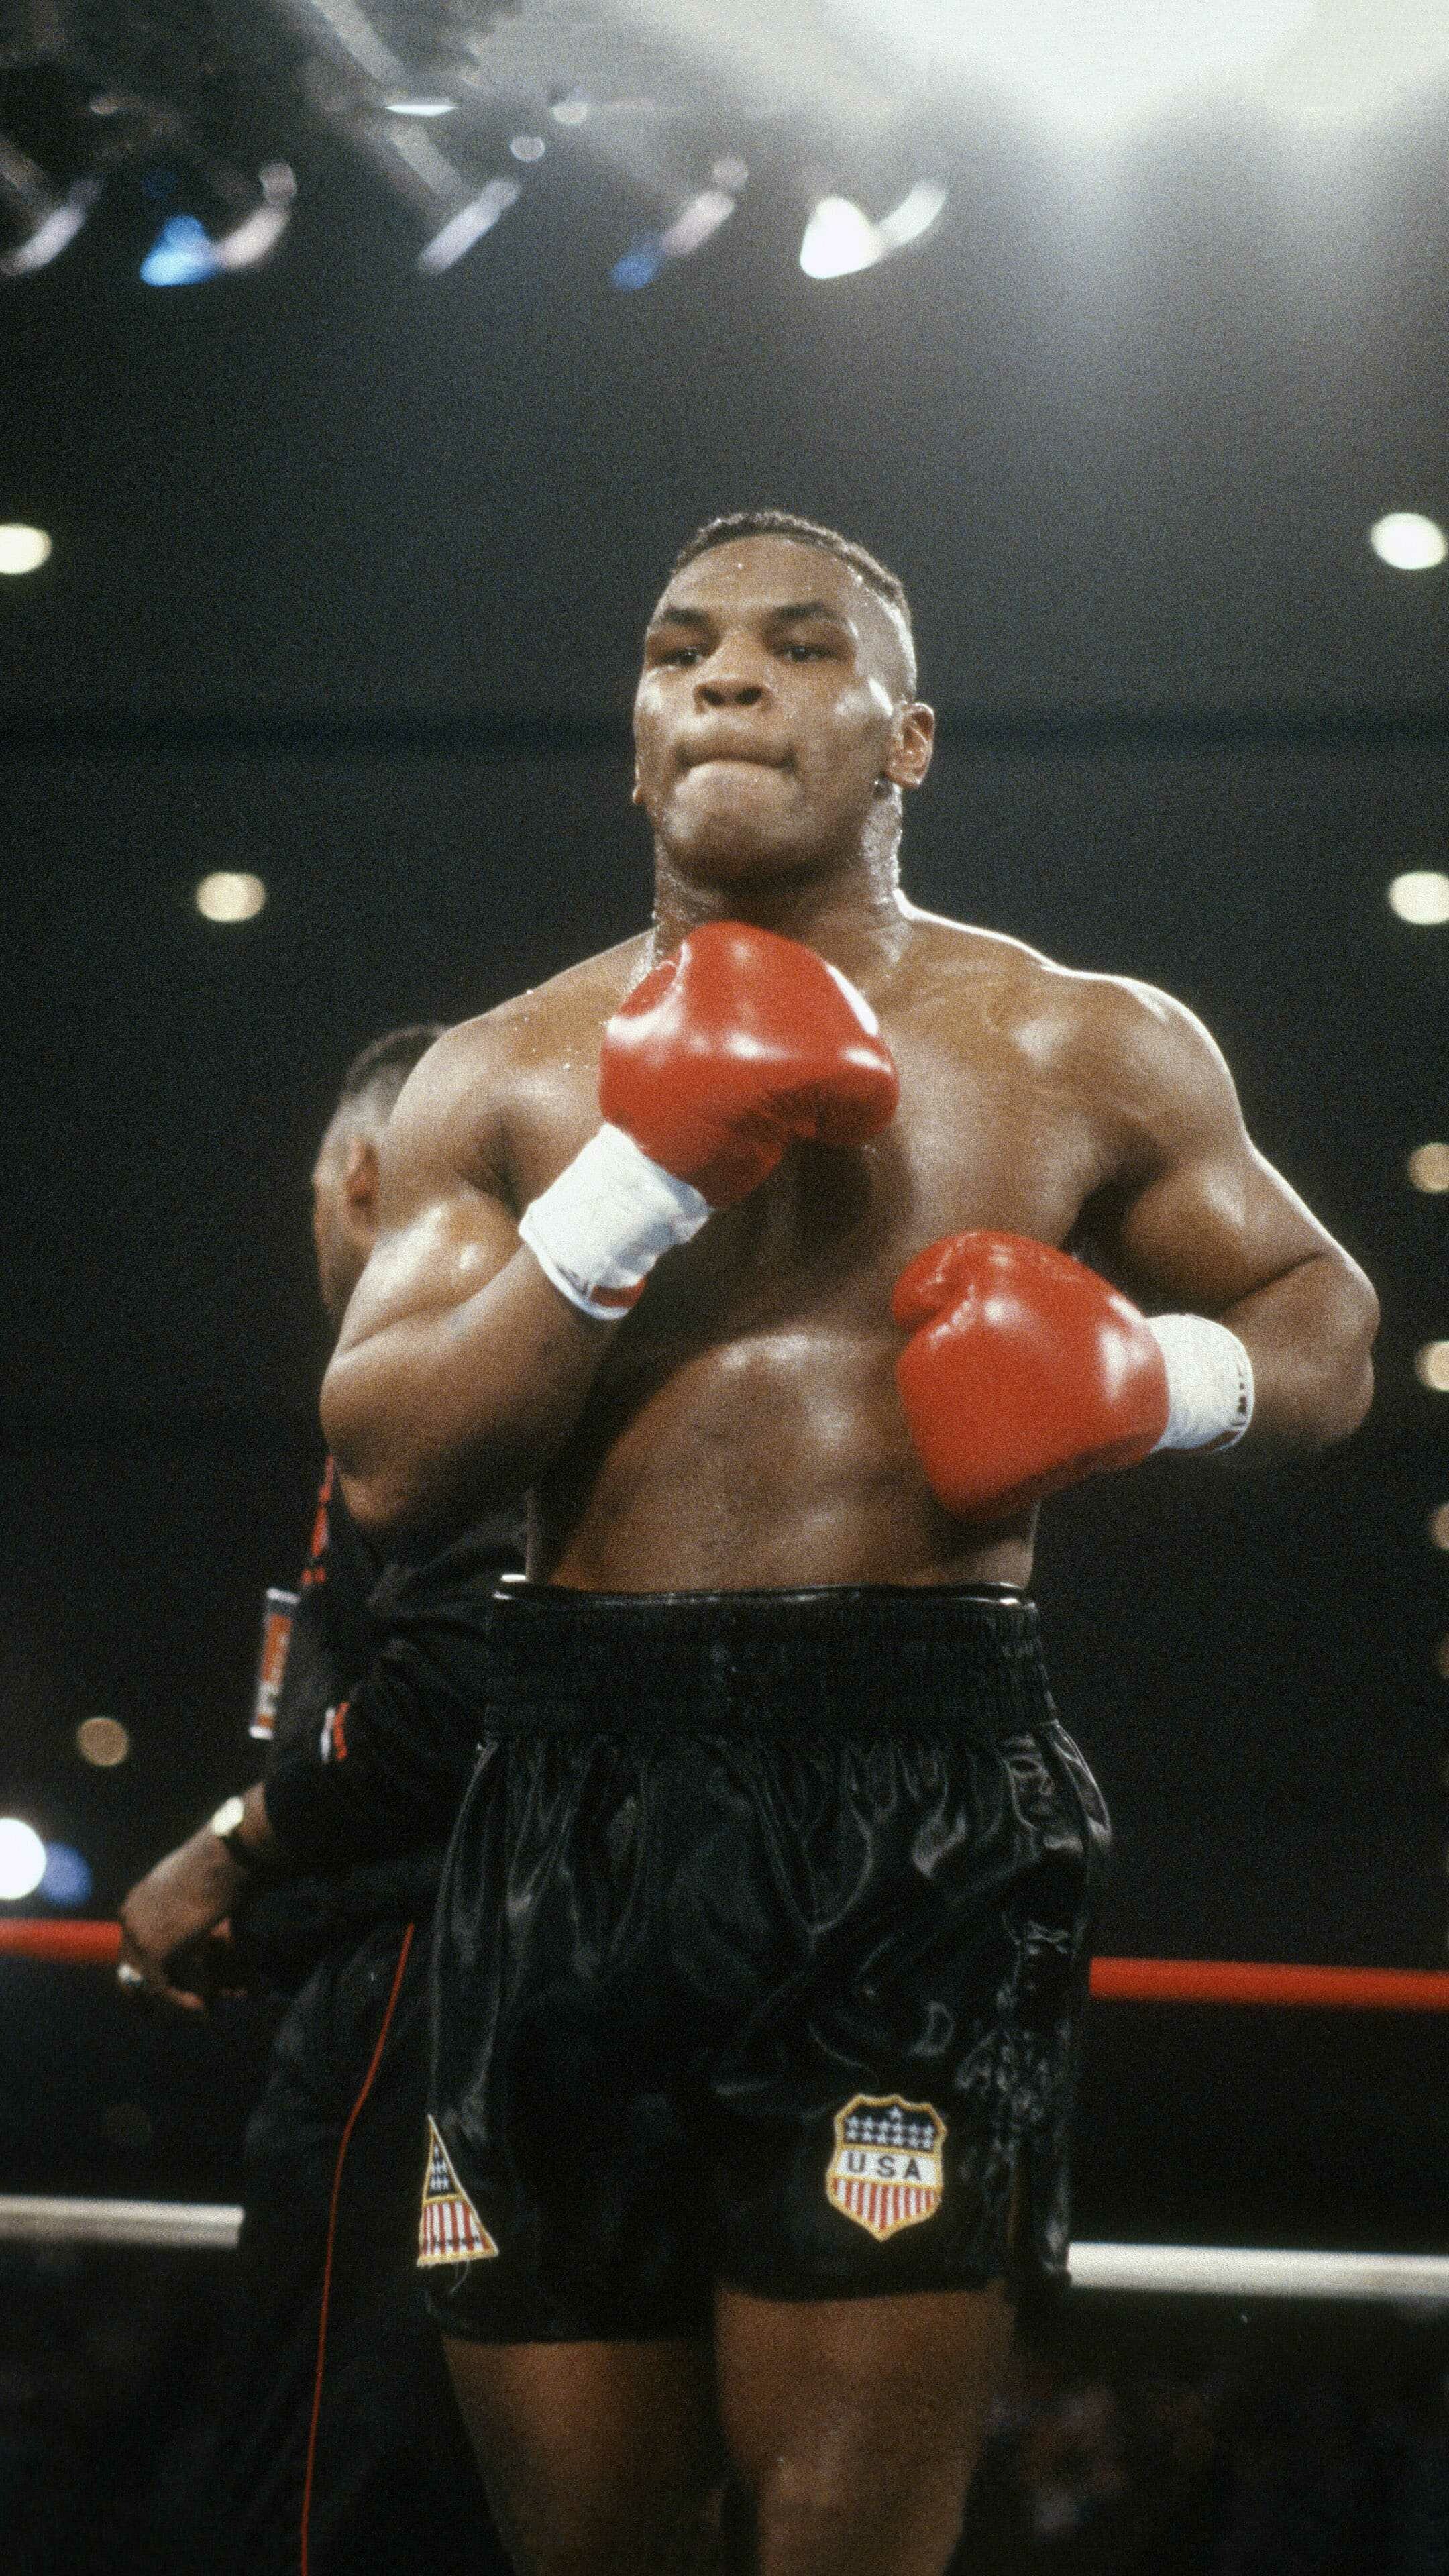 Mike Tyson: An American former professional boxer who competed from 1985 to 2005. 2160x3840 4K Background.